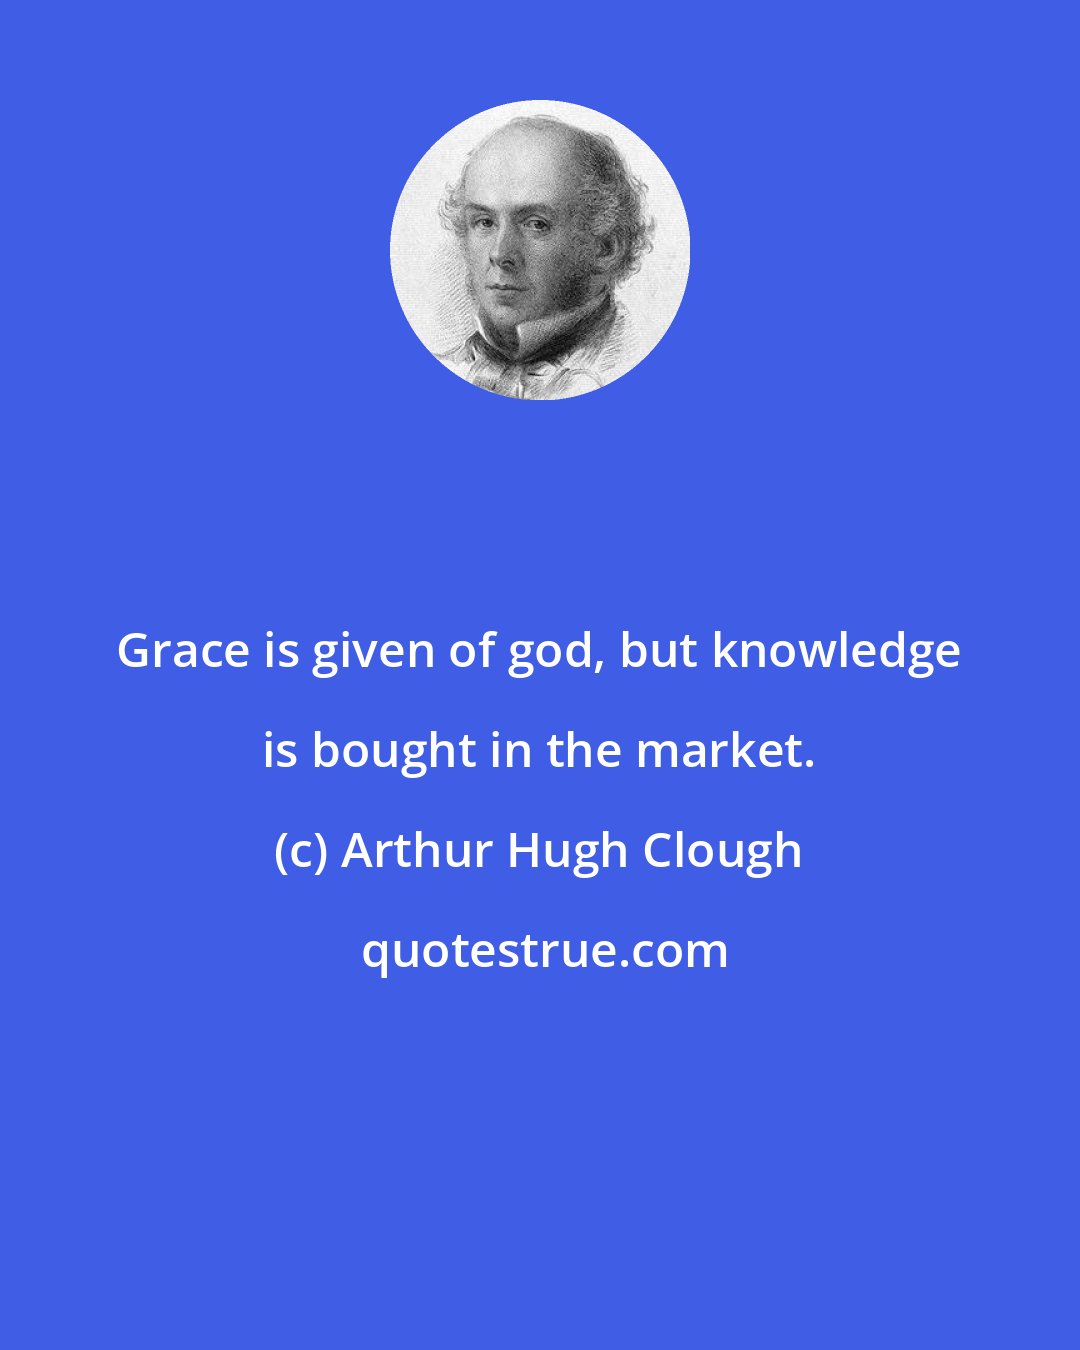 Arthur Hugh Clough: Grace is given of god, but knowledge is bought in the market.